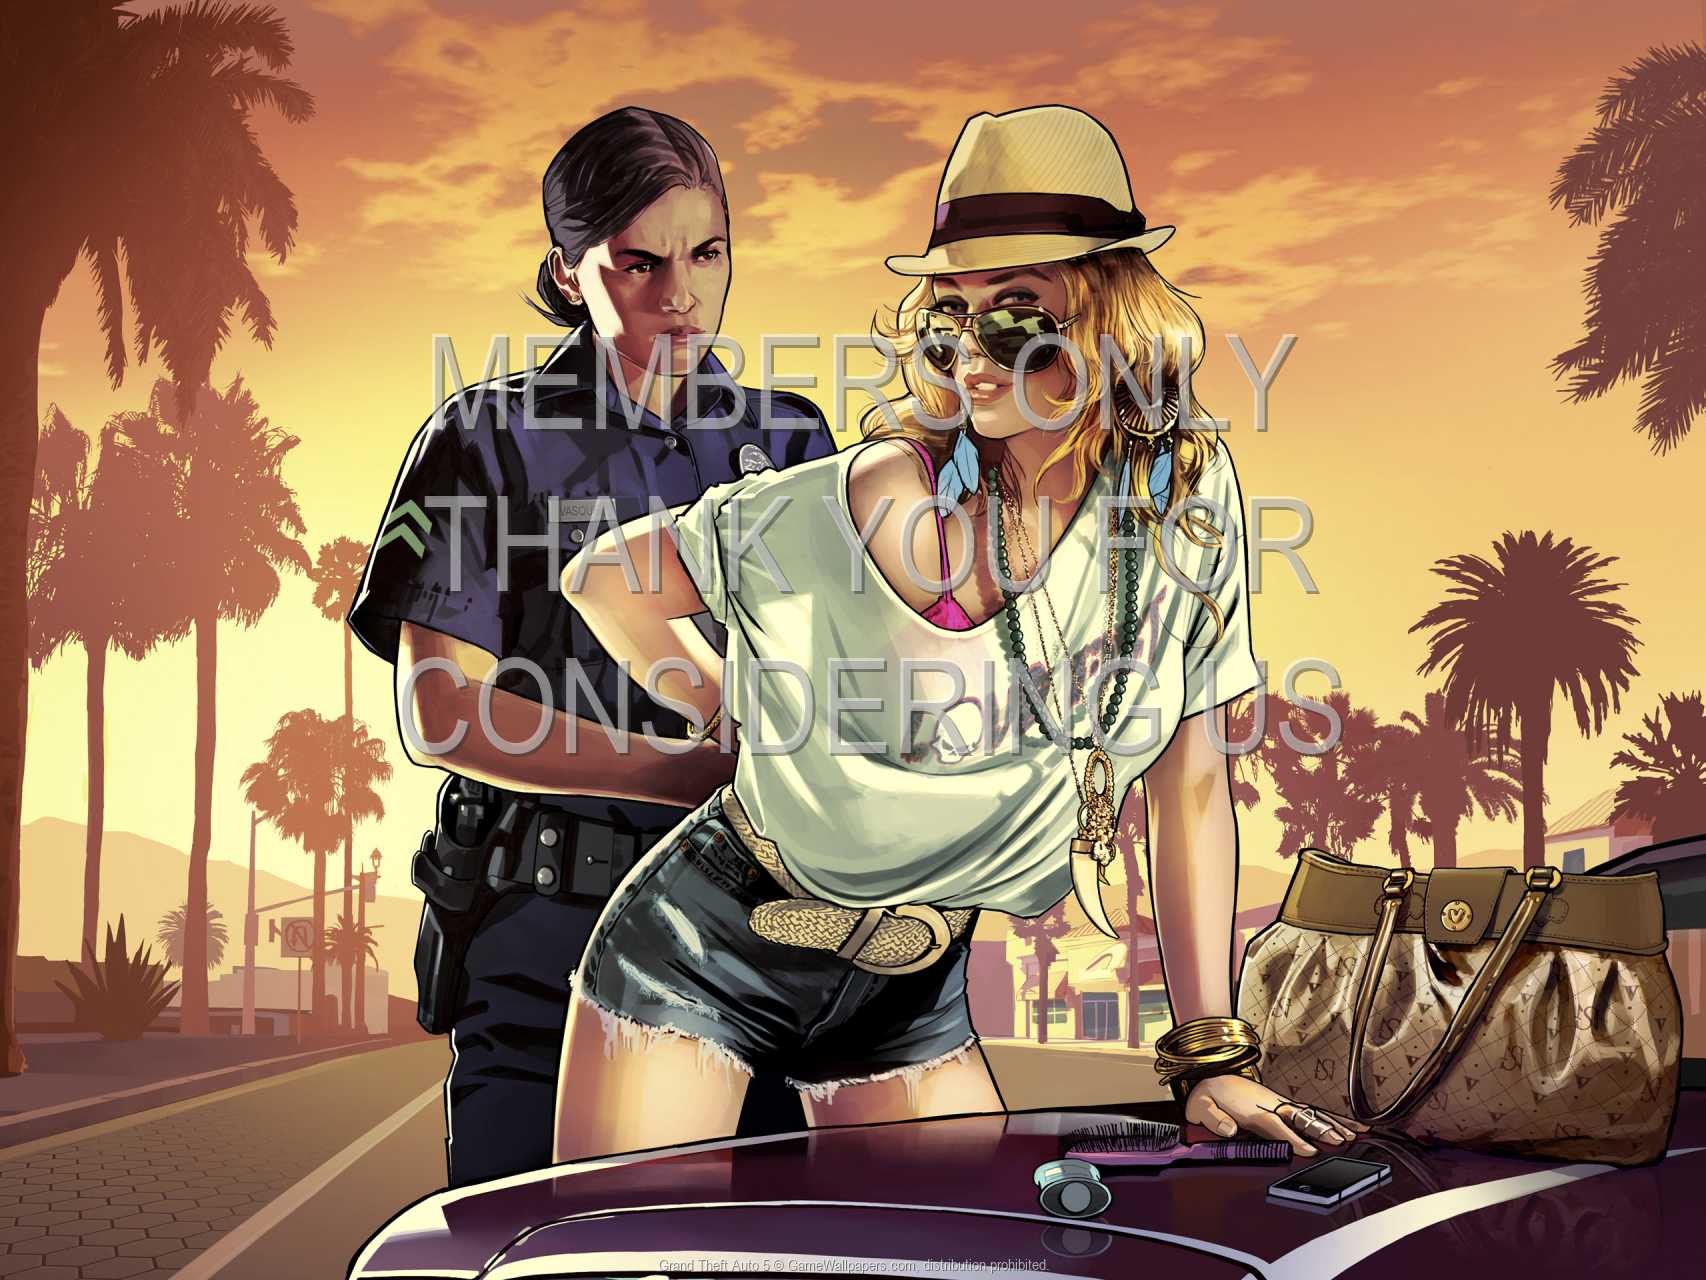 Grand Theft Auto 5 720p Horizontal Mobile wallpaper or background 02